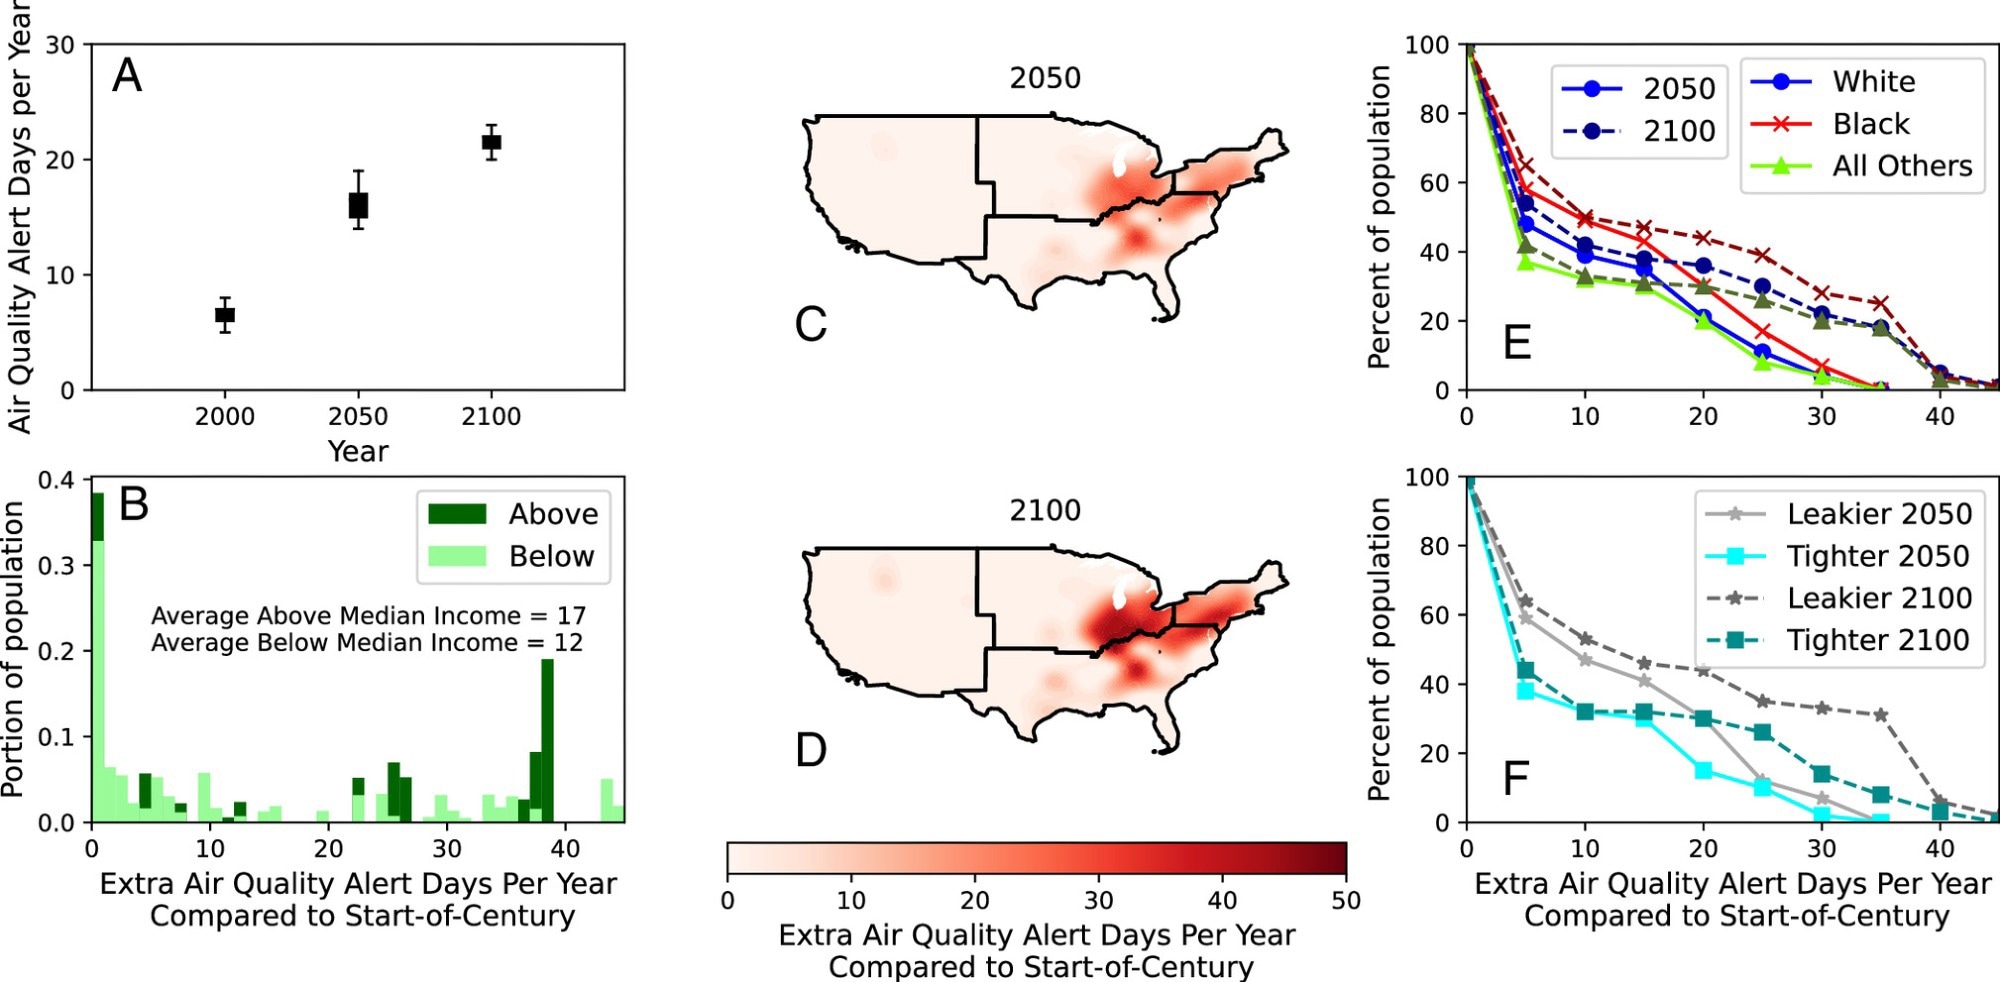 Air quality alert days per year (ADY) rise in the absence of emission reductions. All plots show air quality alerts (defined as outdoor fine particulate matter levels resulting in an Air Quality Index > 100) for the Reference (REF) climate change scenario. (A) National mean population weighted ADY for 2000, 2050, and 2100. Plots (B–F) show Extra ADY (EADY) compared to start-of-century (B) Histogram of EADY in 2100 for population above and below median income. (C/D) Spatial change in EADY in 2050 and 2100. (E) Cumulative density of EADY by race in 2050 and 2100. (F) Cumulative density of EADY by residential leakage rates above (“Leakier”) and below (“Tighter”) the national average. Leakage is defined as air changes per hour at a 50 Pa pressure difference (ACH50), indicating greater infiltration of outdoor air inside.